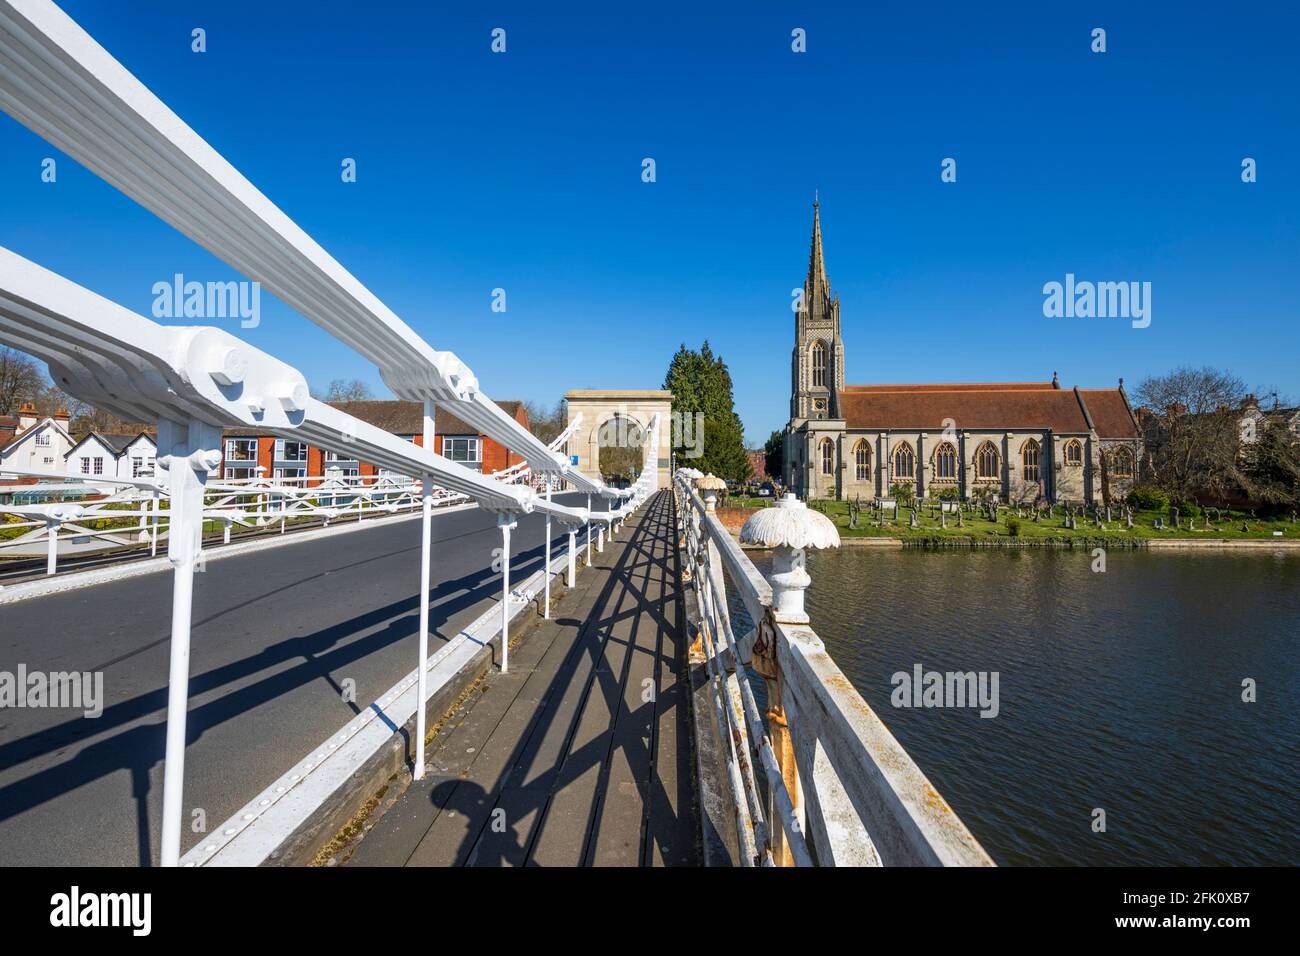 Marlow Suspension Bridge on the River Thames with All Saints Church, Marlow, Buckinghamshire, England, United Kingdom, Europe Stock Photo